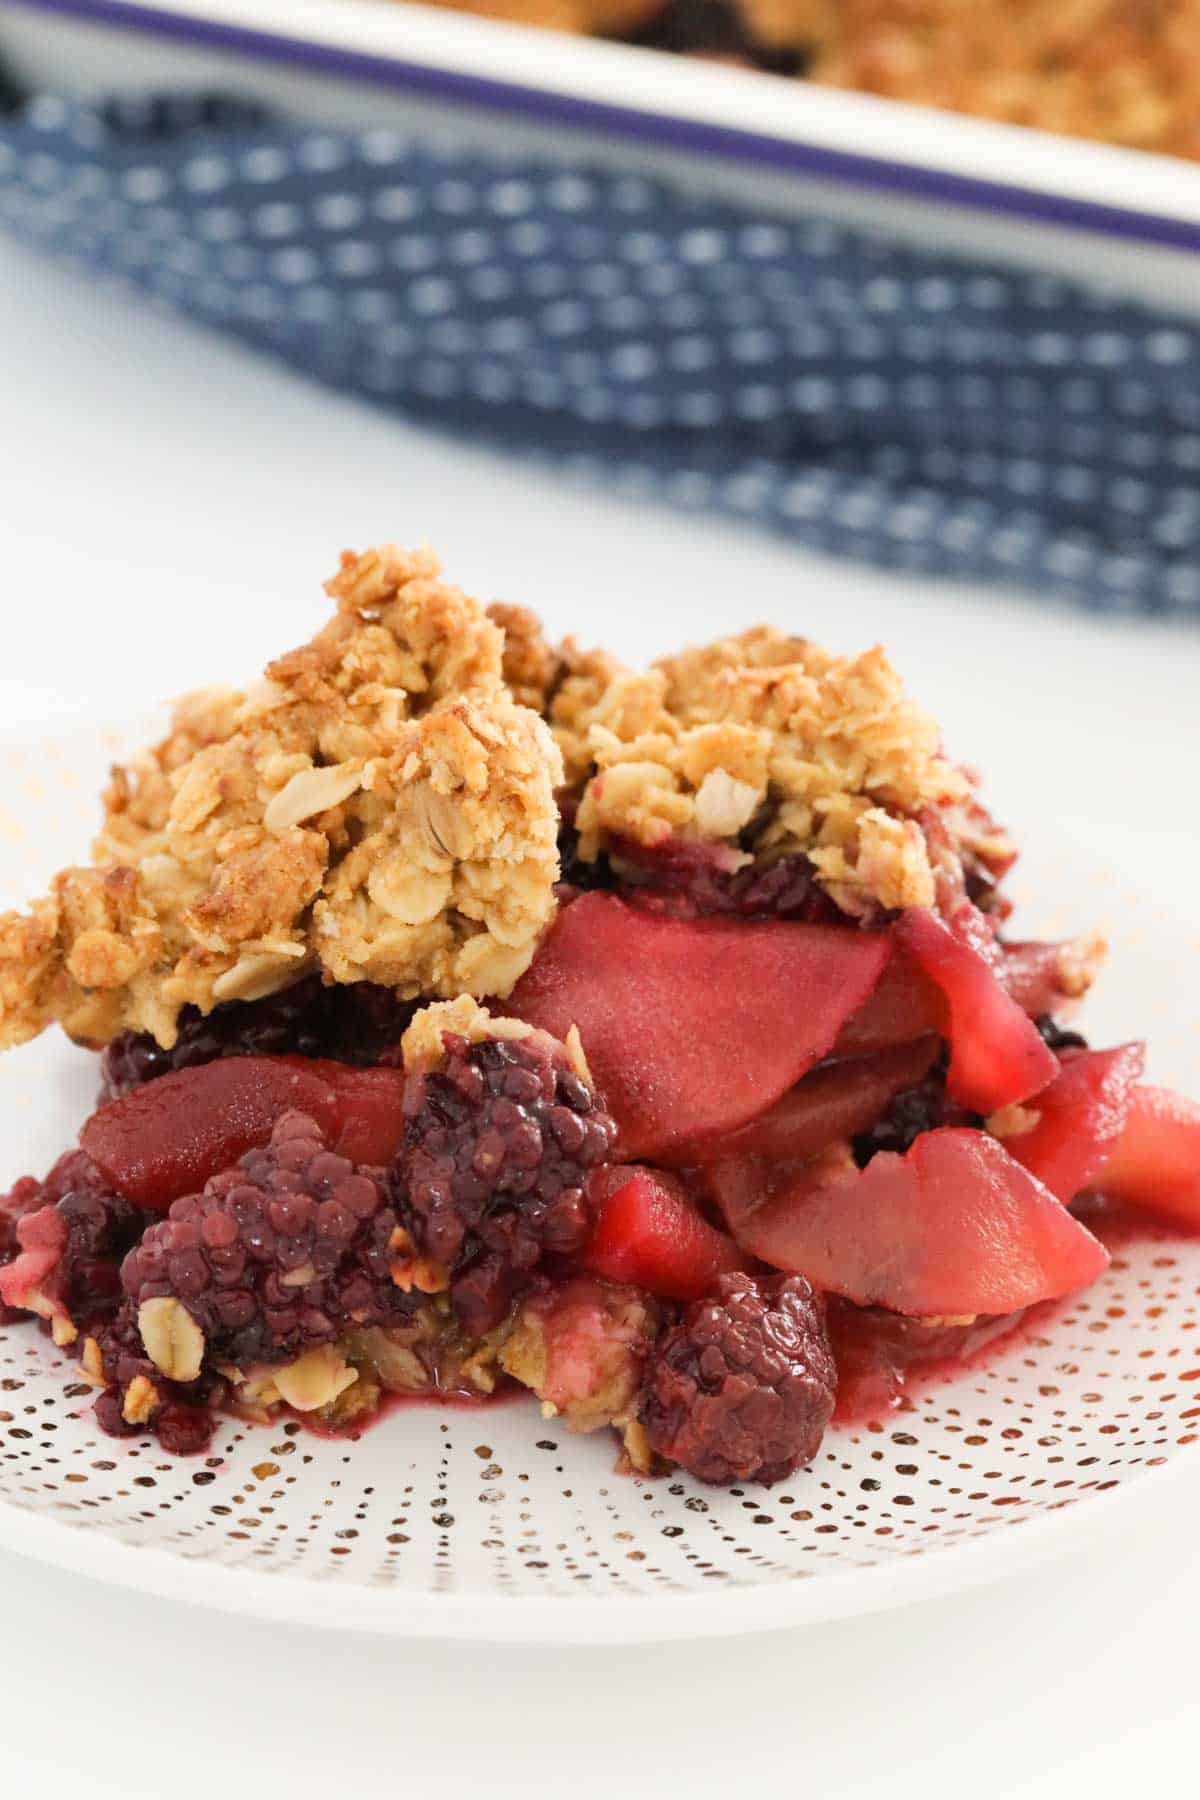 Blackberry and apple crumble on a plate.